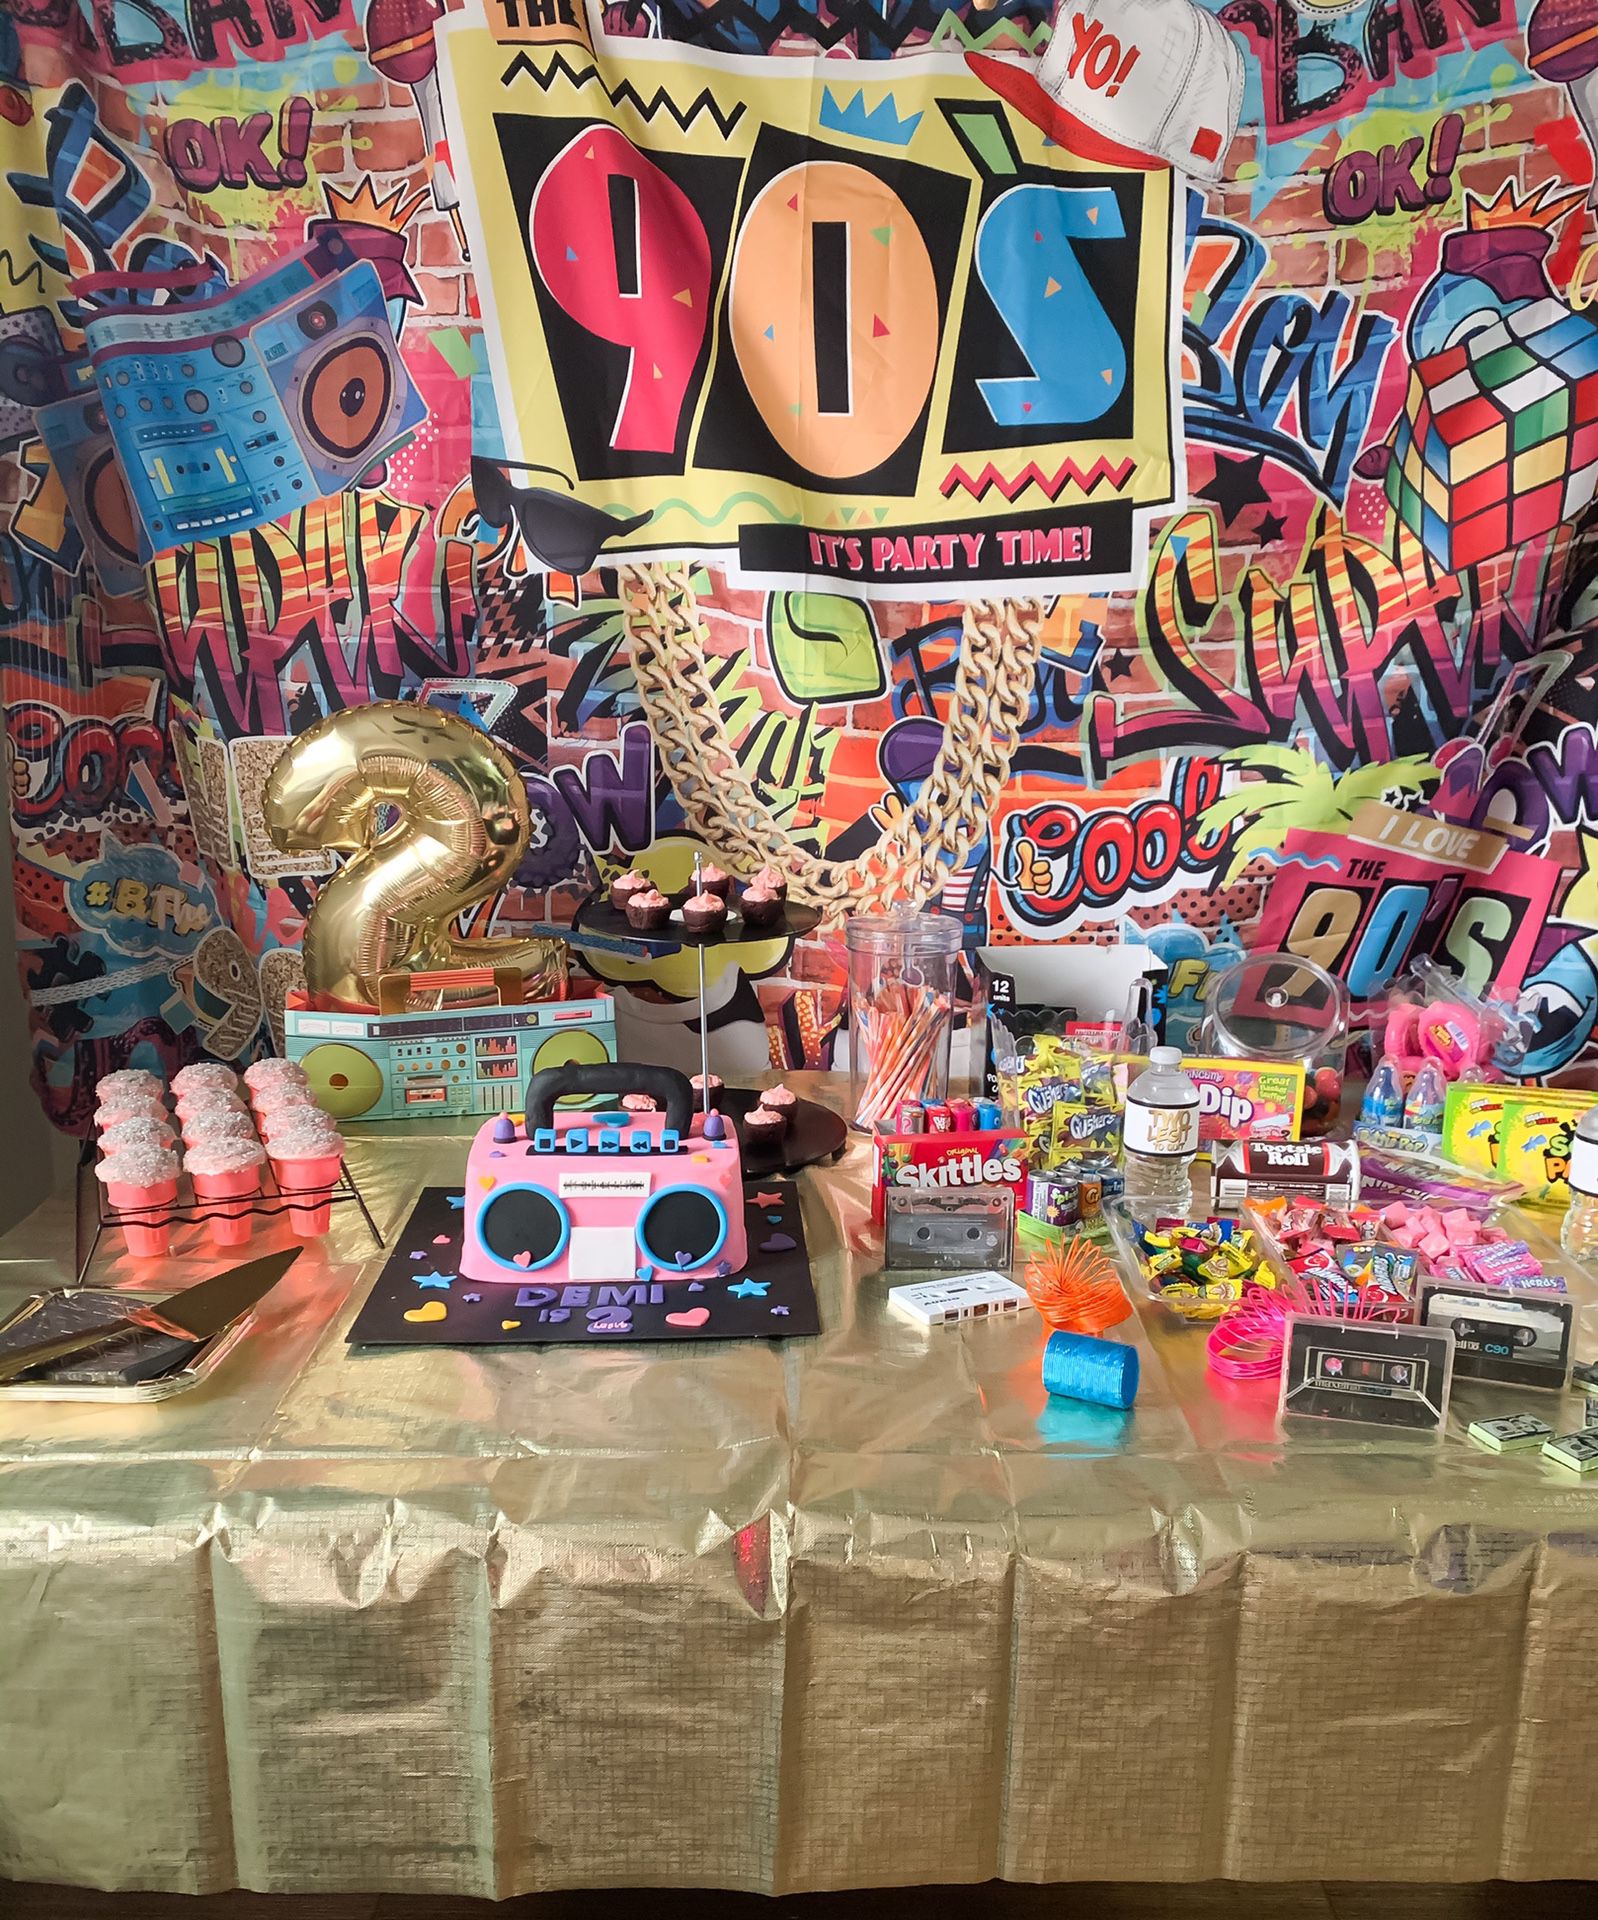 90’s party